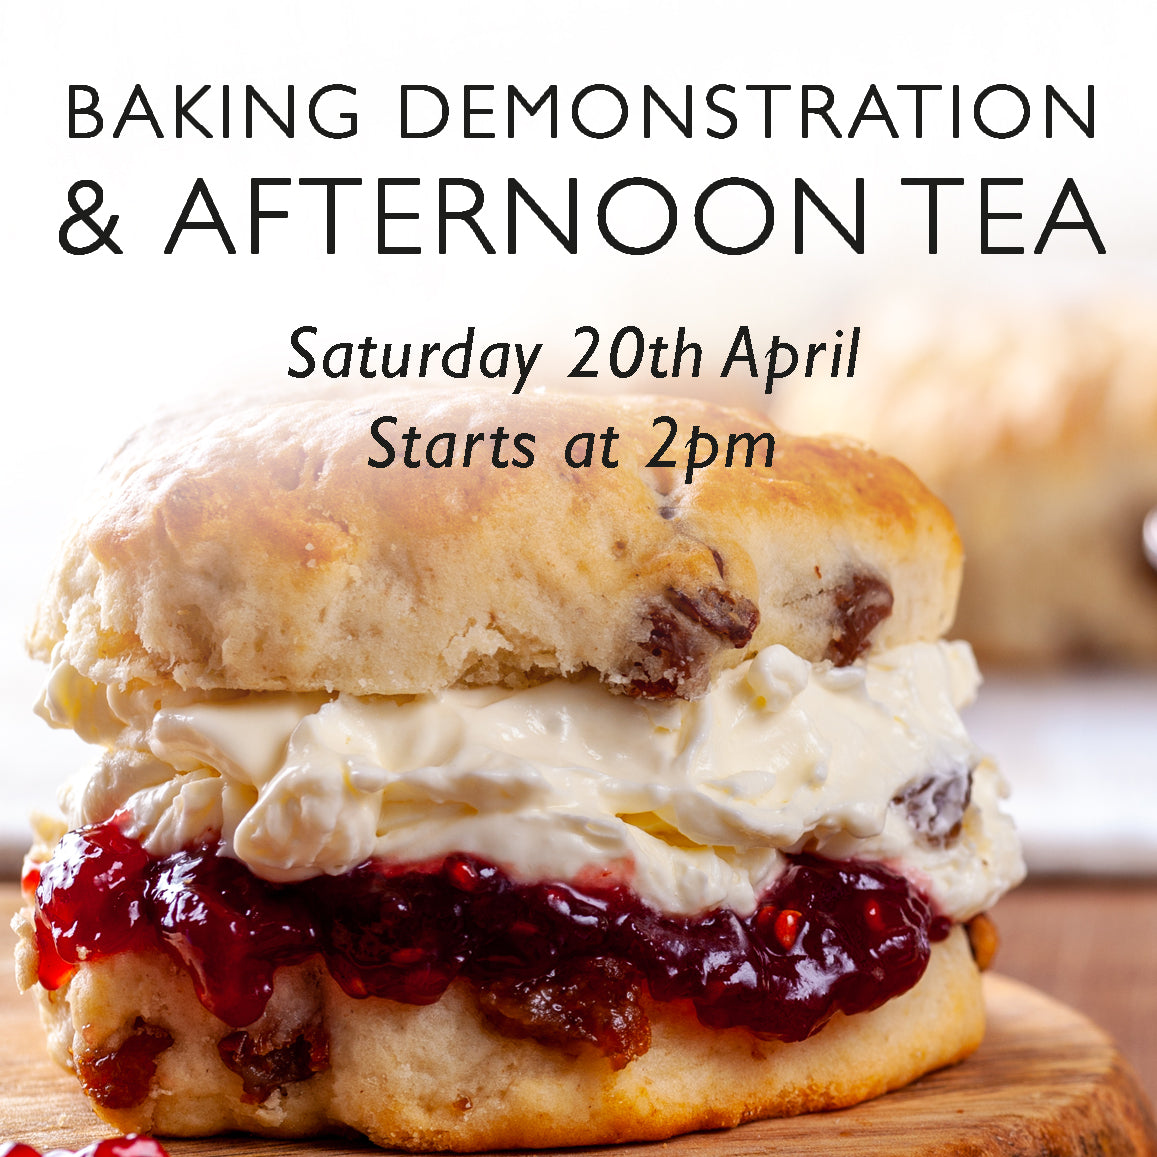 A scone full of jam and cream advertising a baking and afternoon tea demonstration